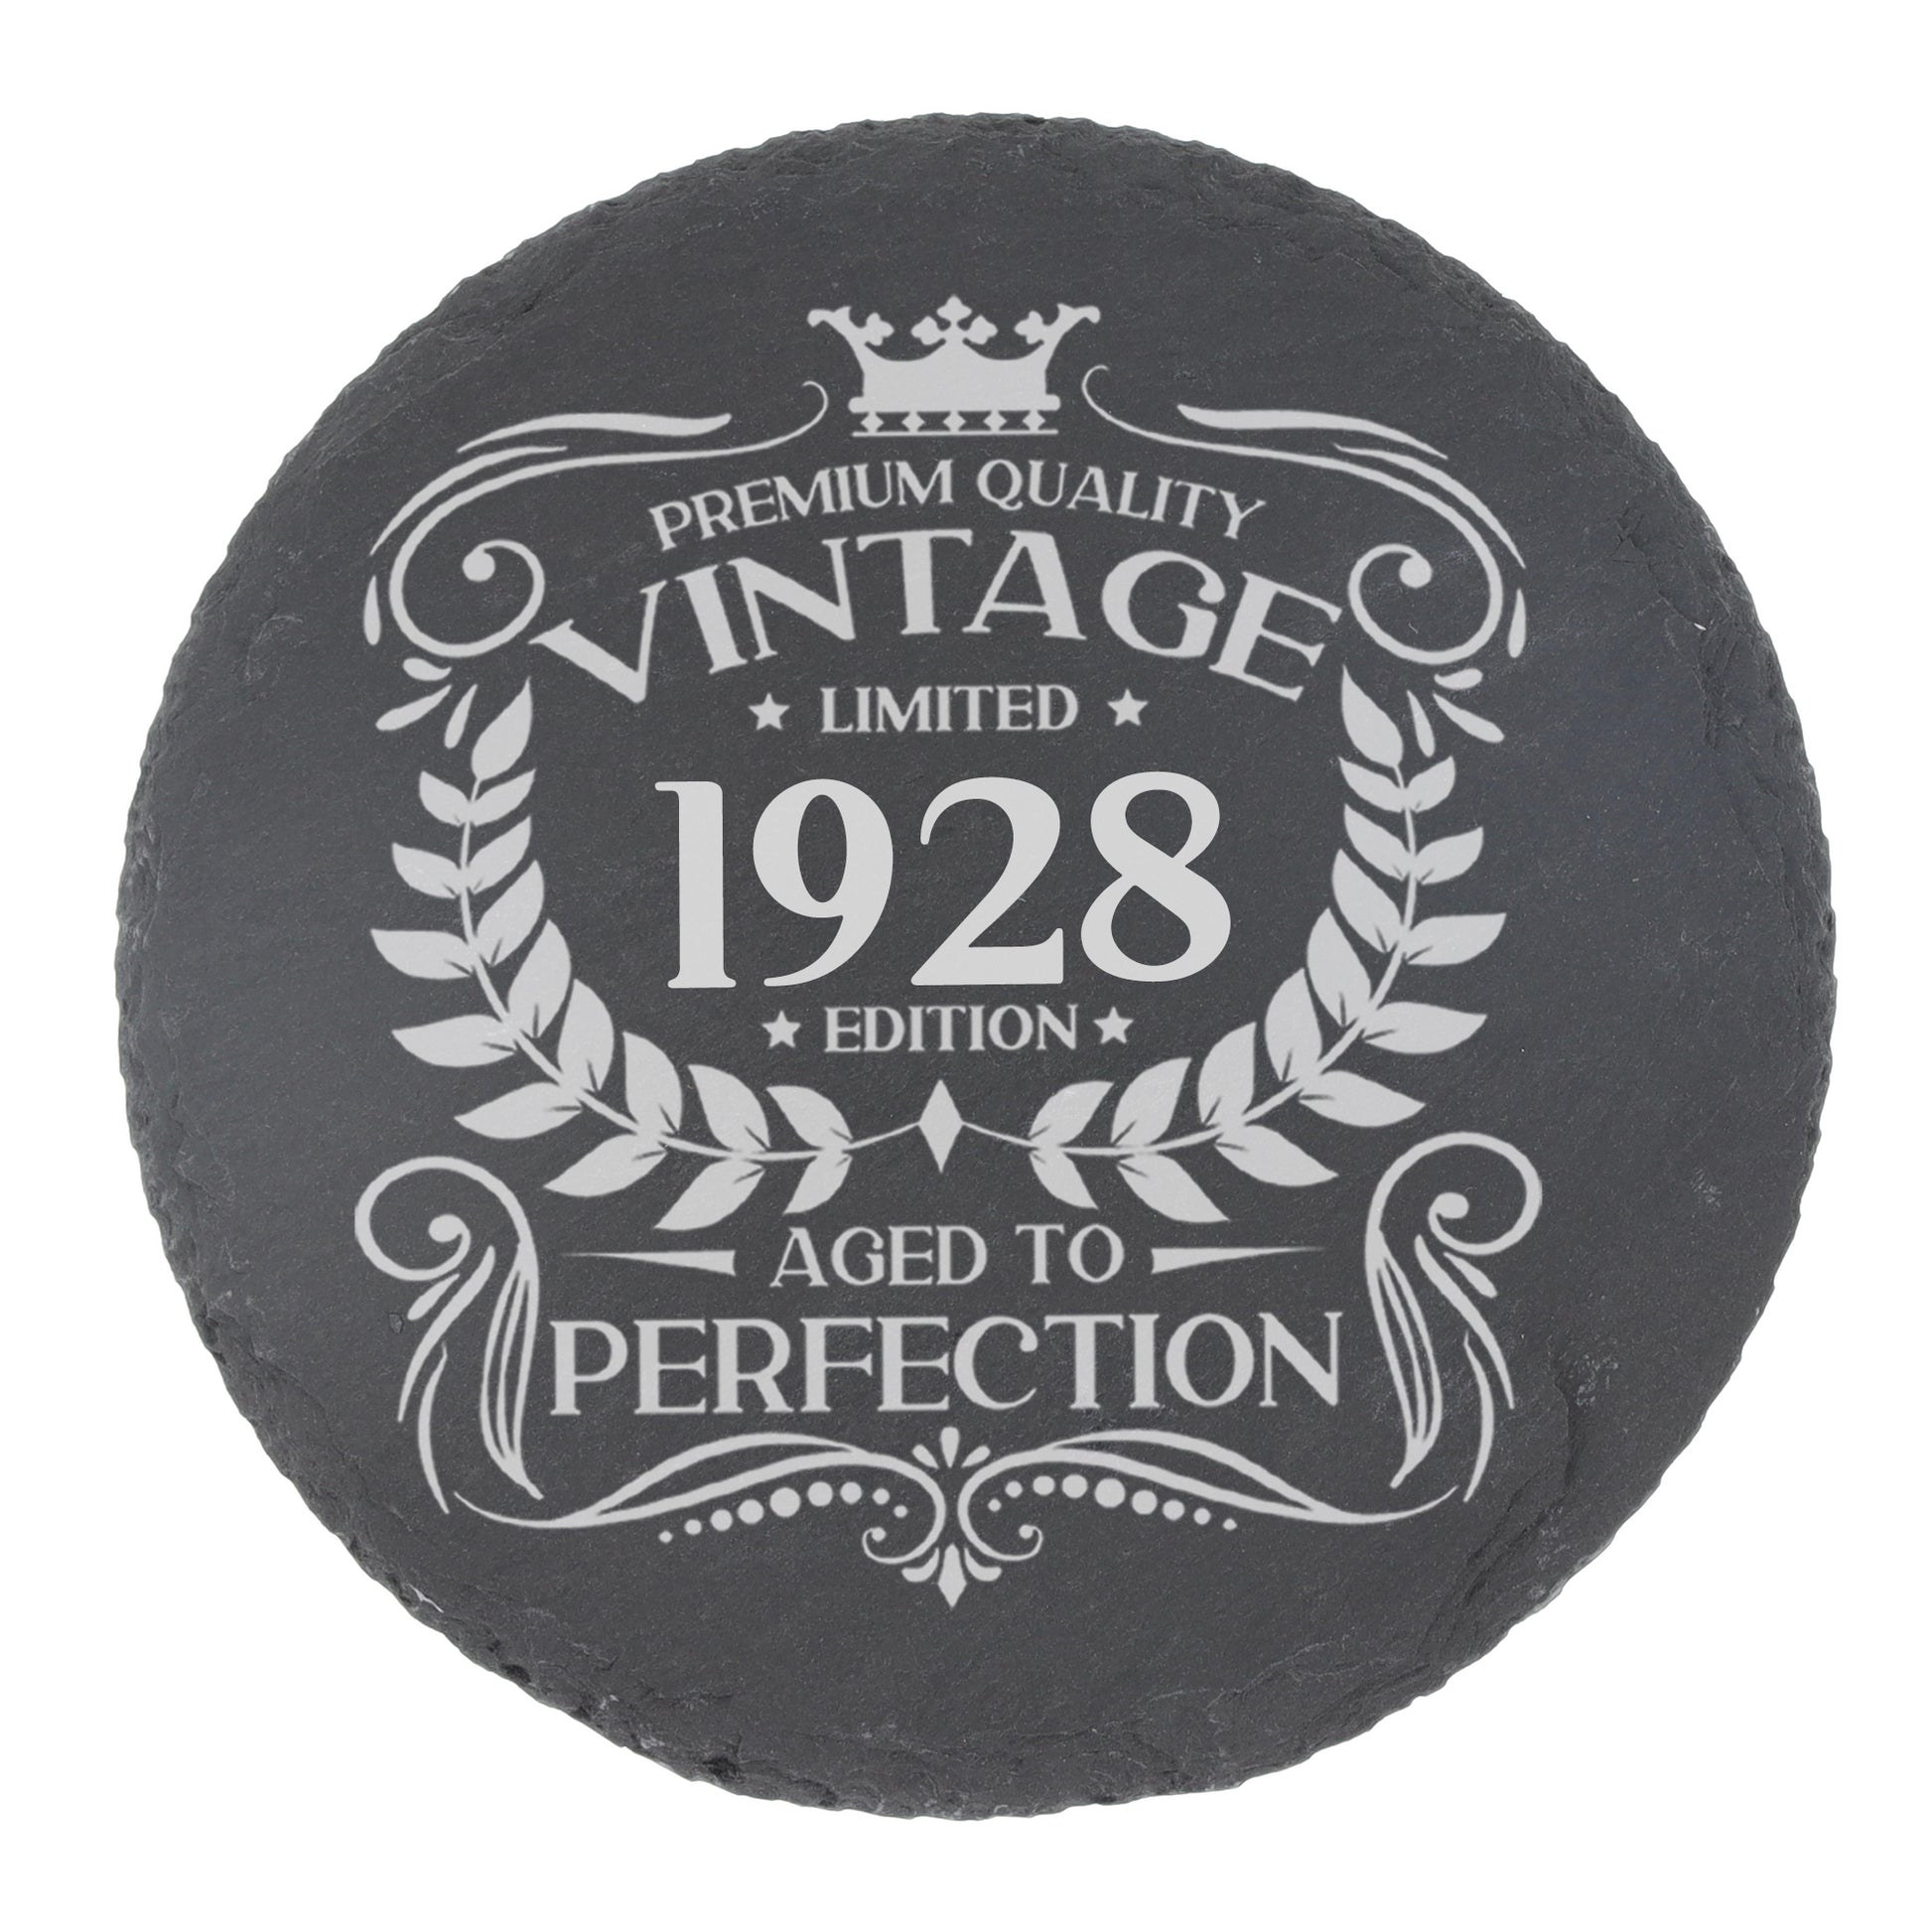 Personalised Vintage 1928 Mug and/or Coaster  - Always Looking Good - Round Coaster On Its Own  